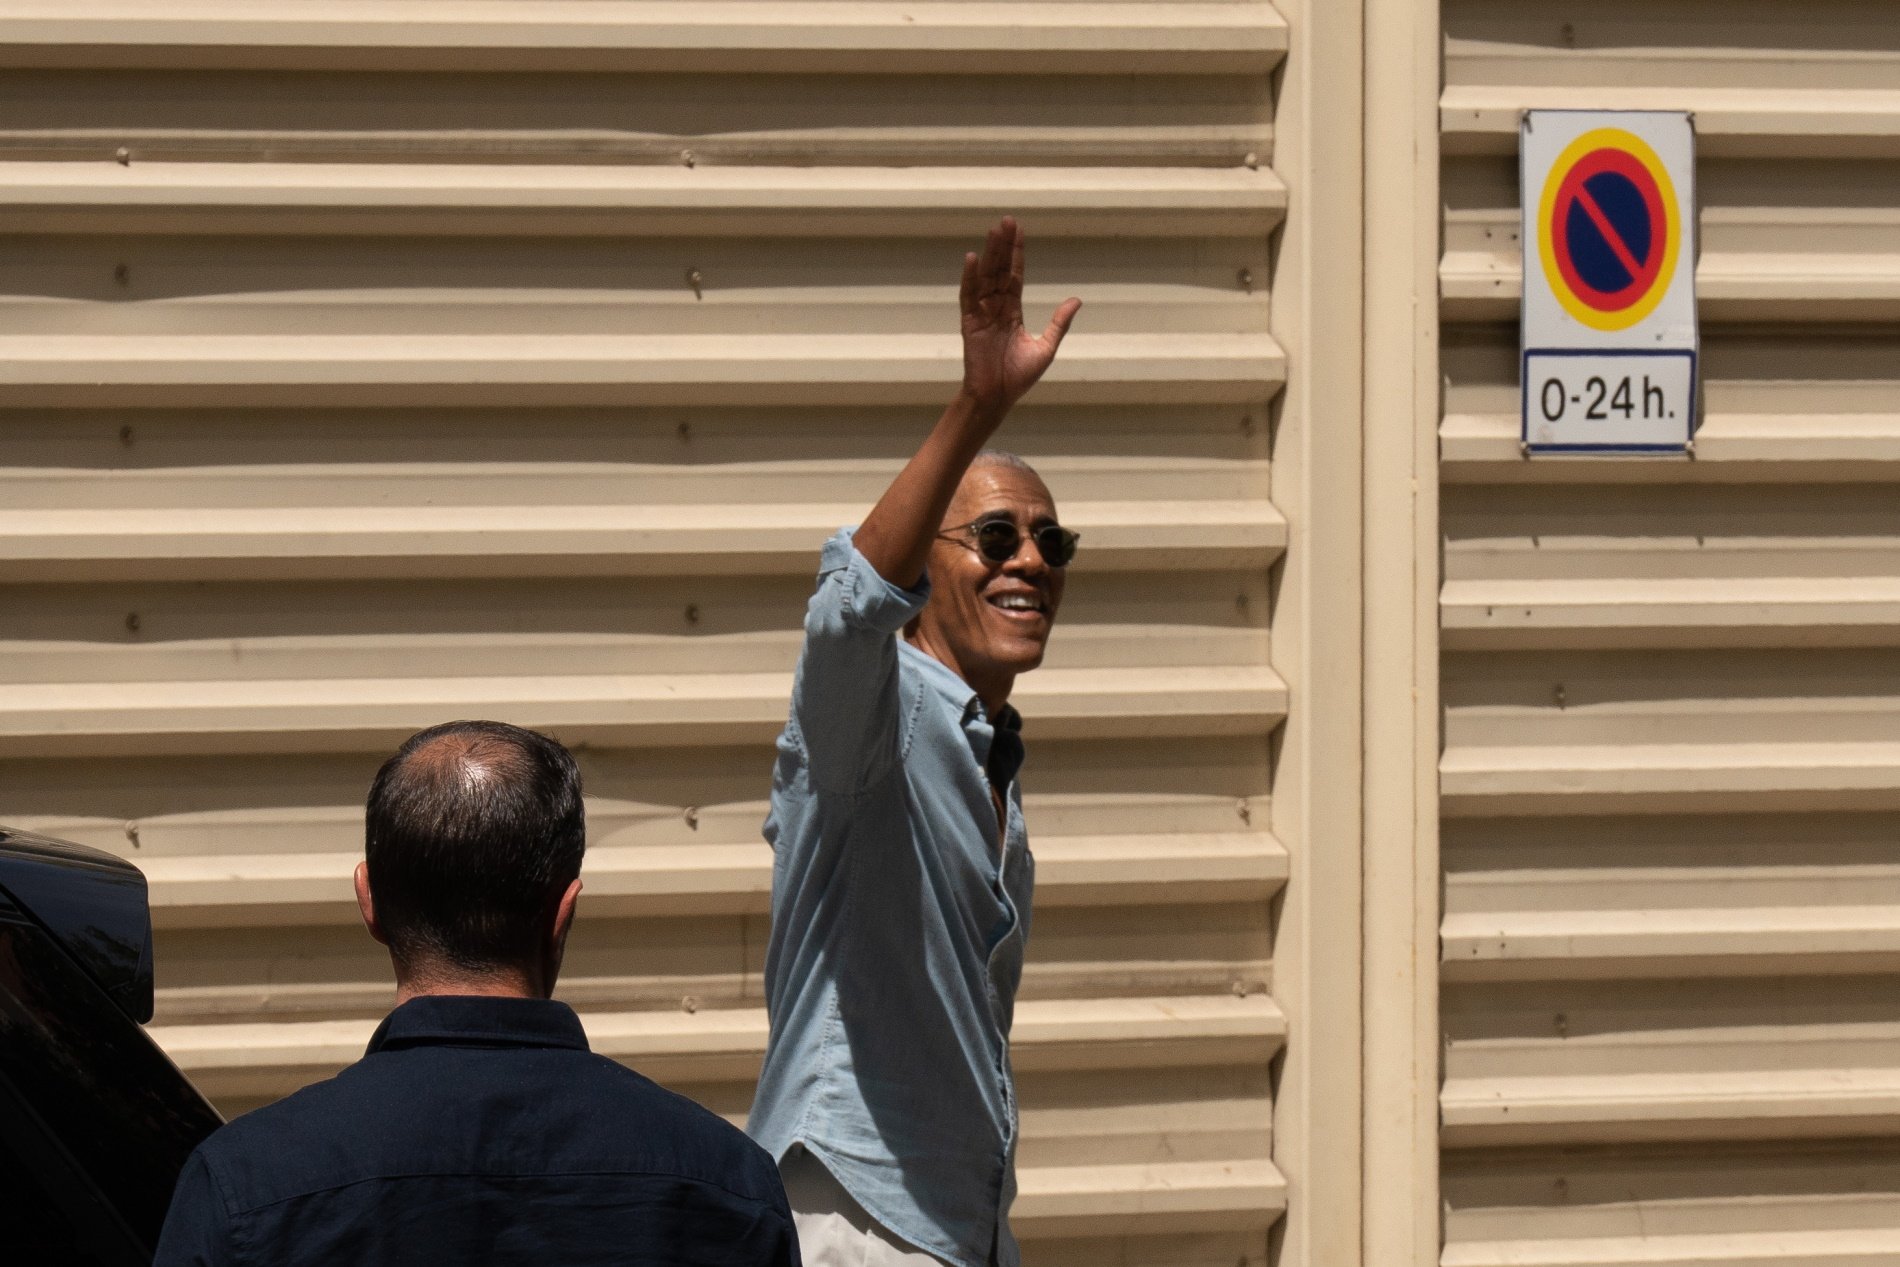 The Obamas and Steven Spielberg in Barcelona: city sightseeing before Springsteen concert